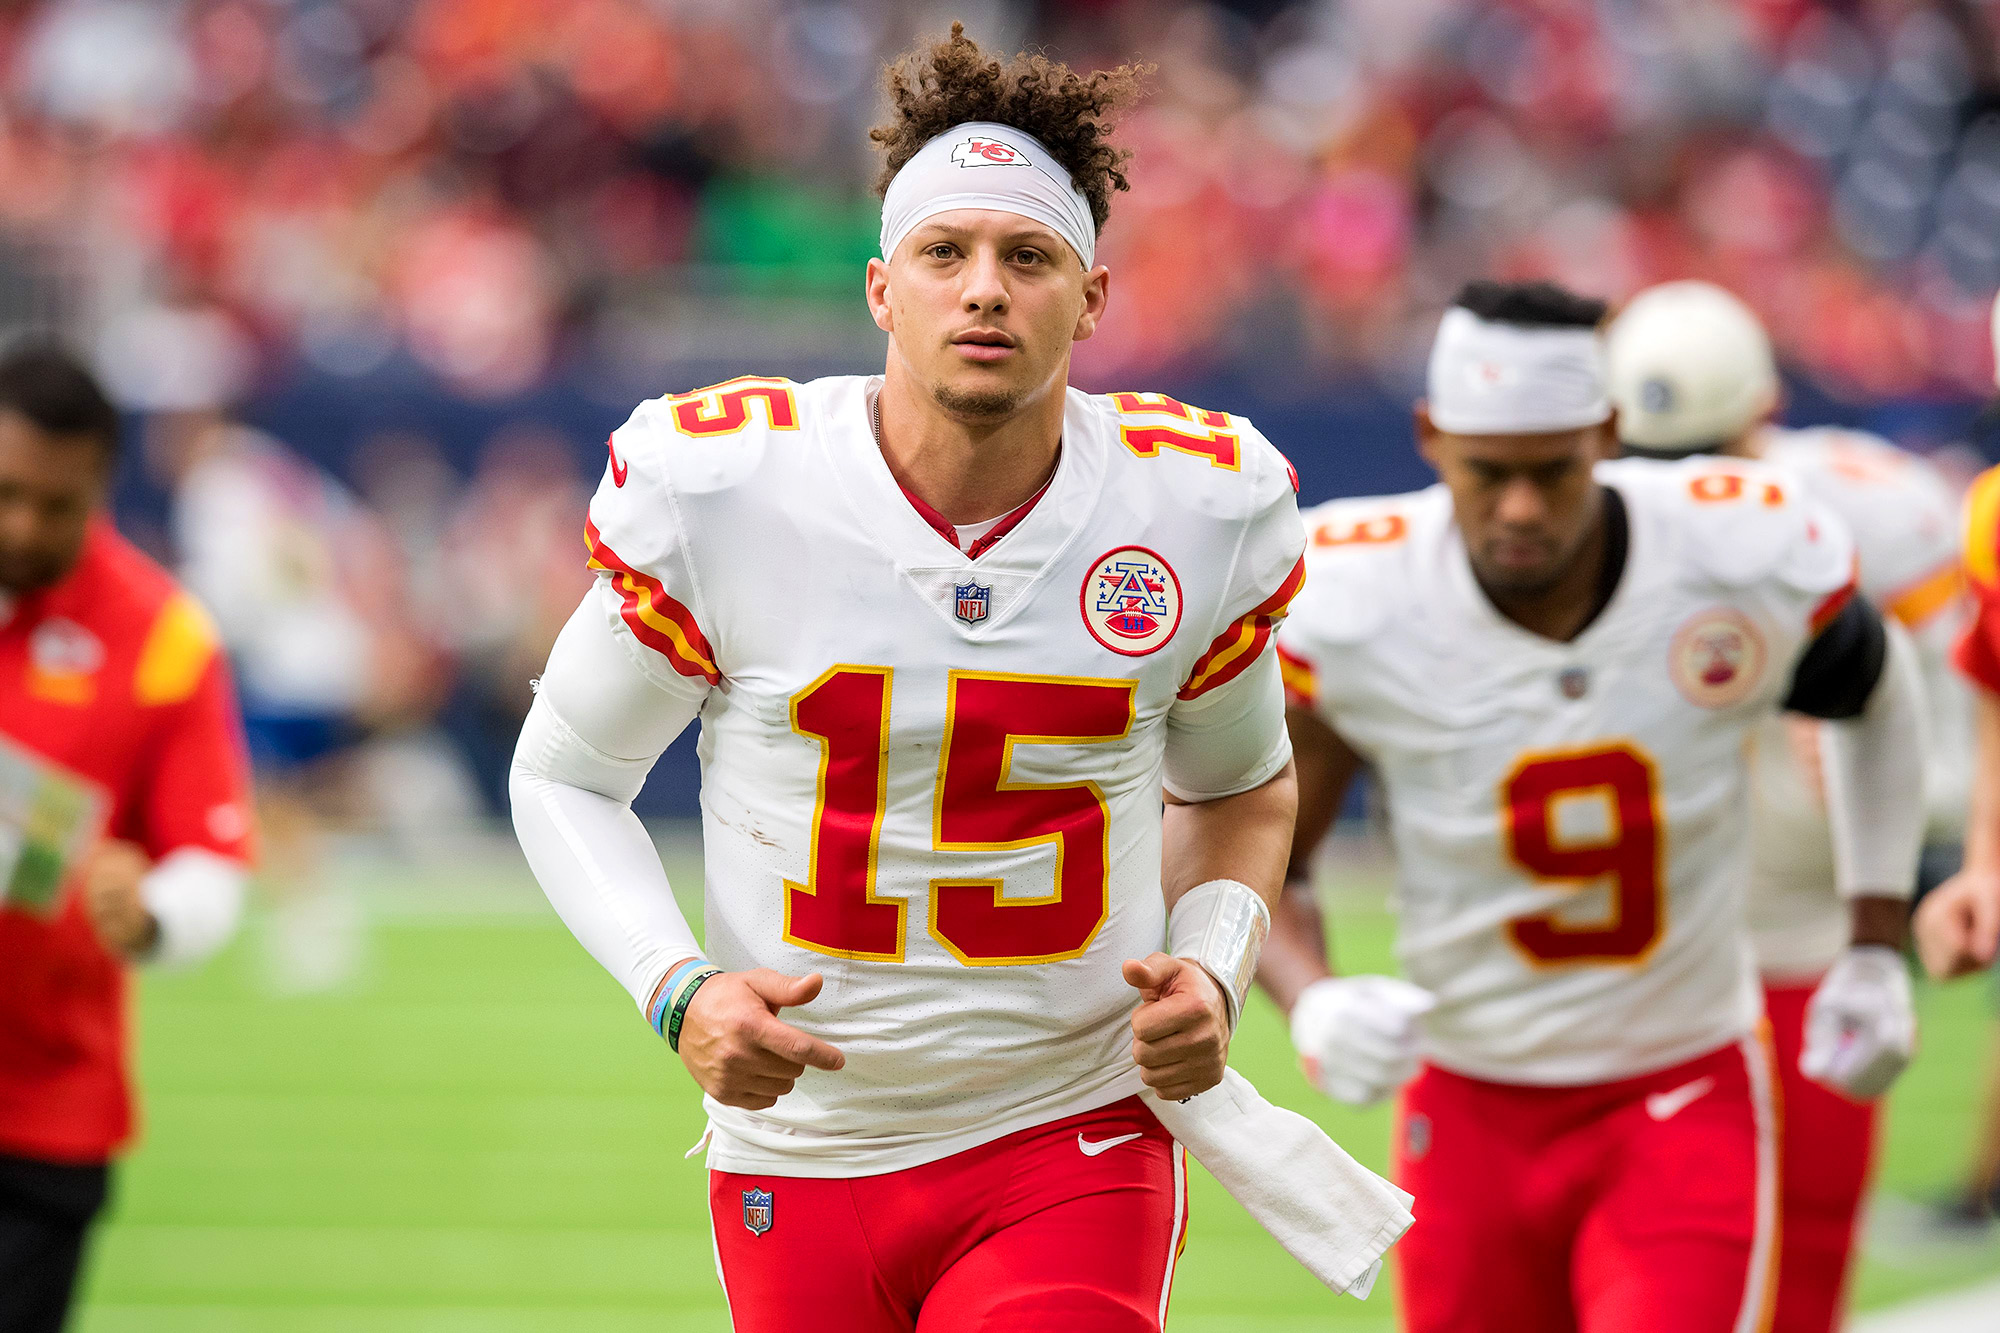 Patrick Mahomes Speaks Out After Brother Jackson's Arrest